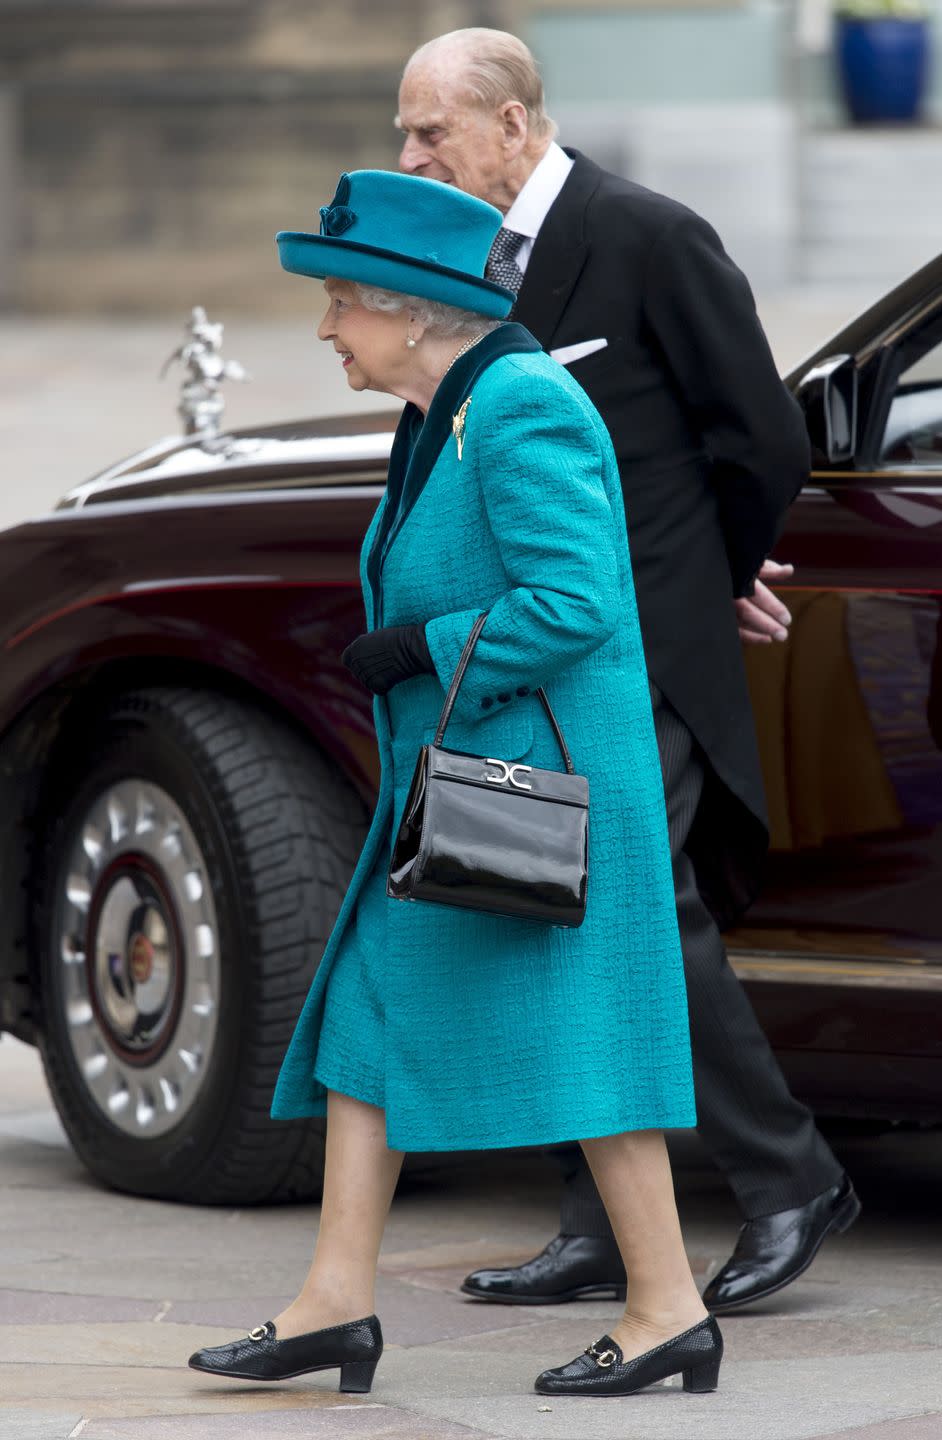 50) Prince Phillip is required to walk behind the Queen.